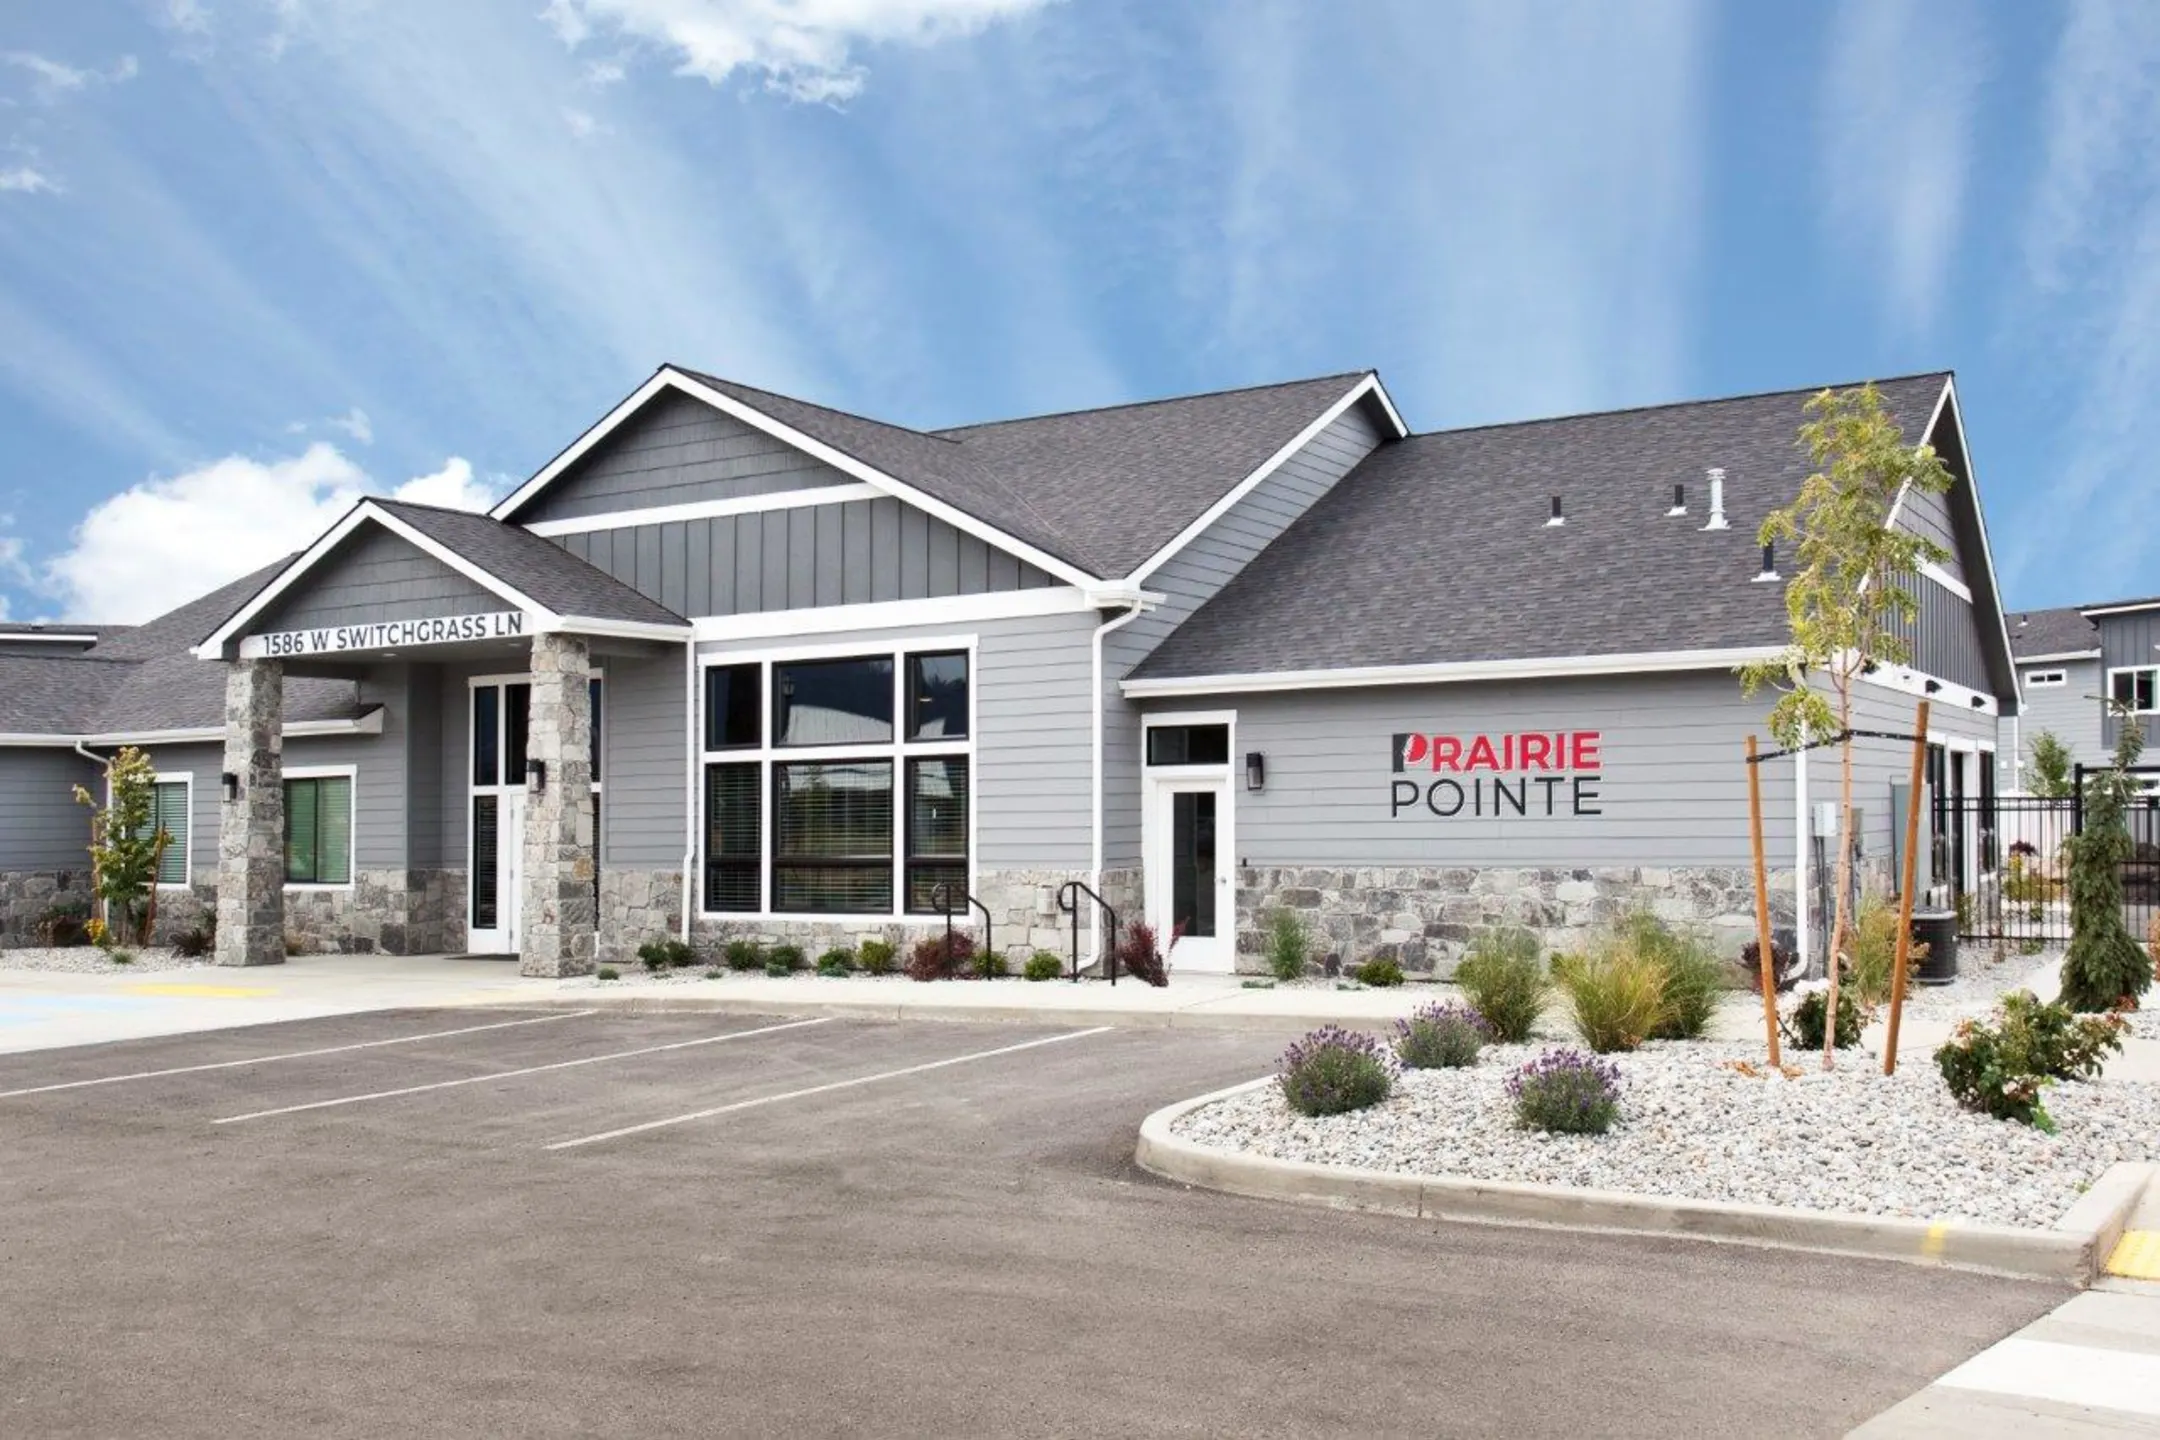 Building - Prairie Pointe Apartments and Townhomes - Coeur D Alene, ID